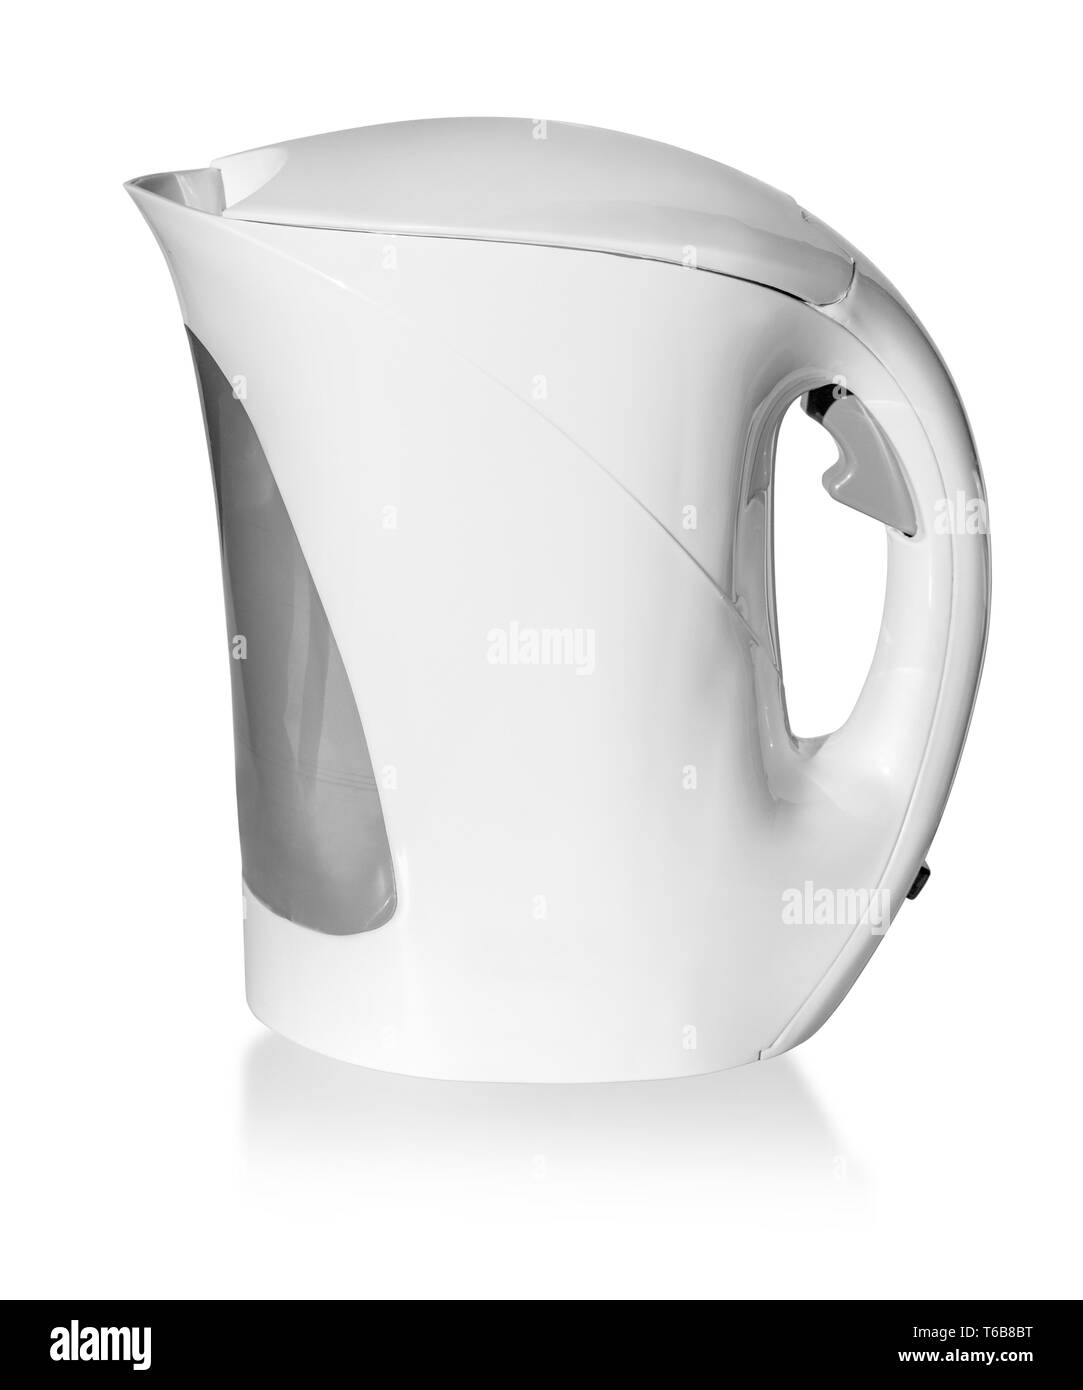 https://c8.alamy.com/comp/T6B8BT/white-plastic-electric-kettle-isolated-on-white-background-with-clipping-path-T6B8BT.jpg